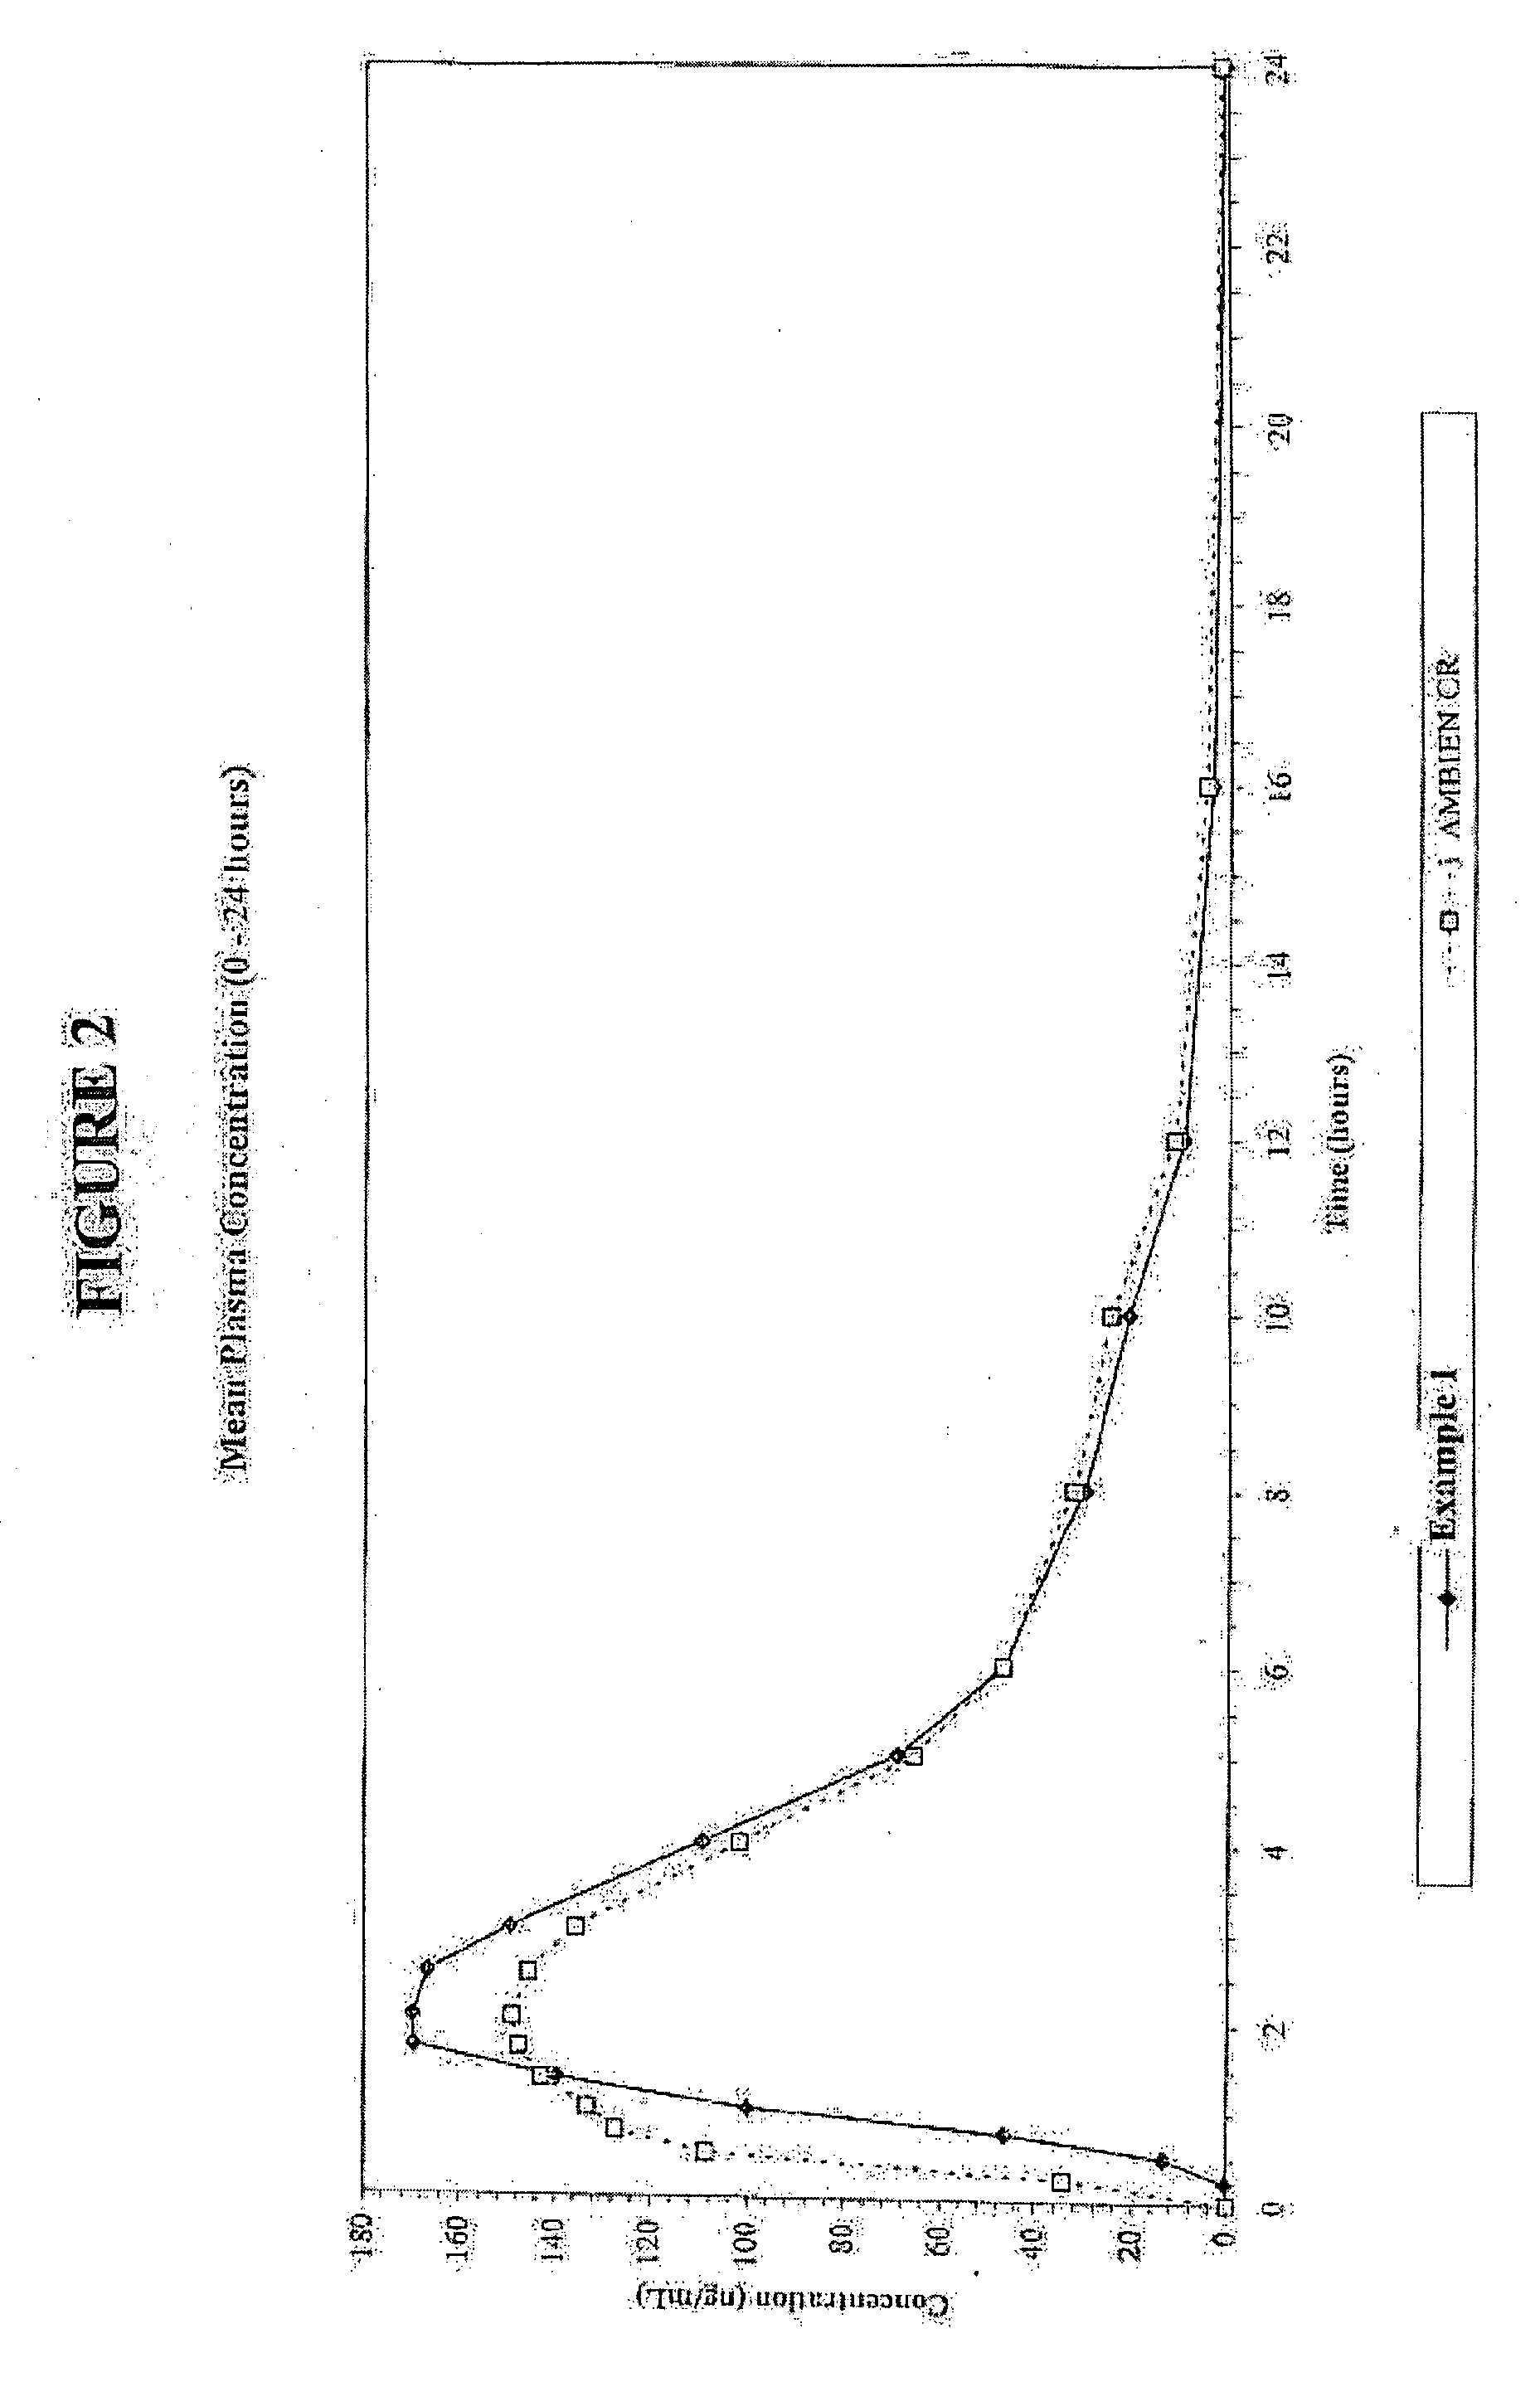 Oral controlled release formulation for sedative and hypotnic agents